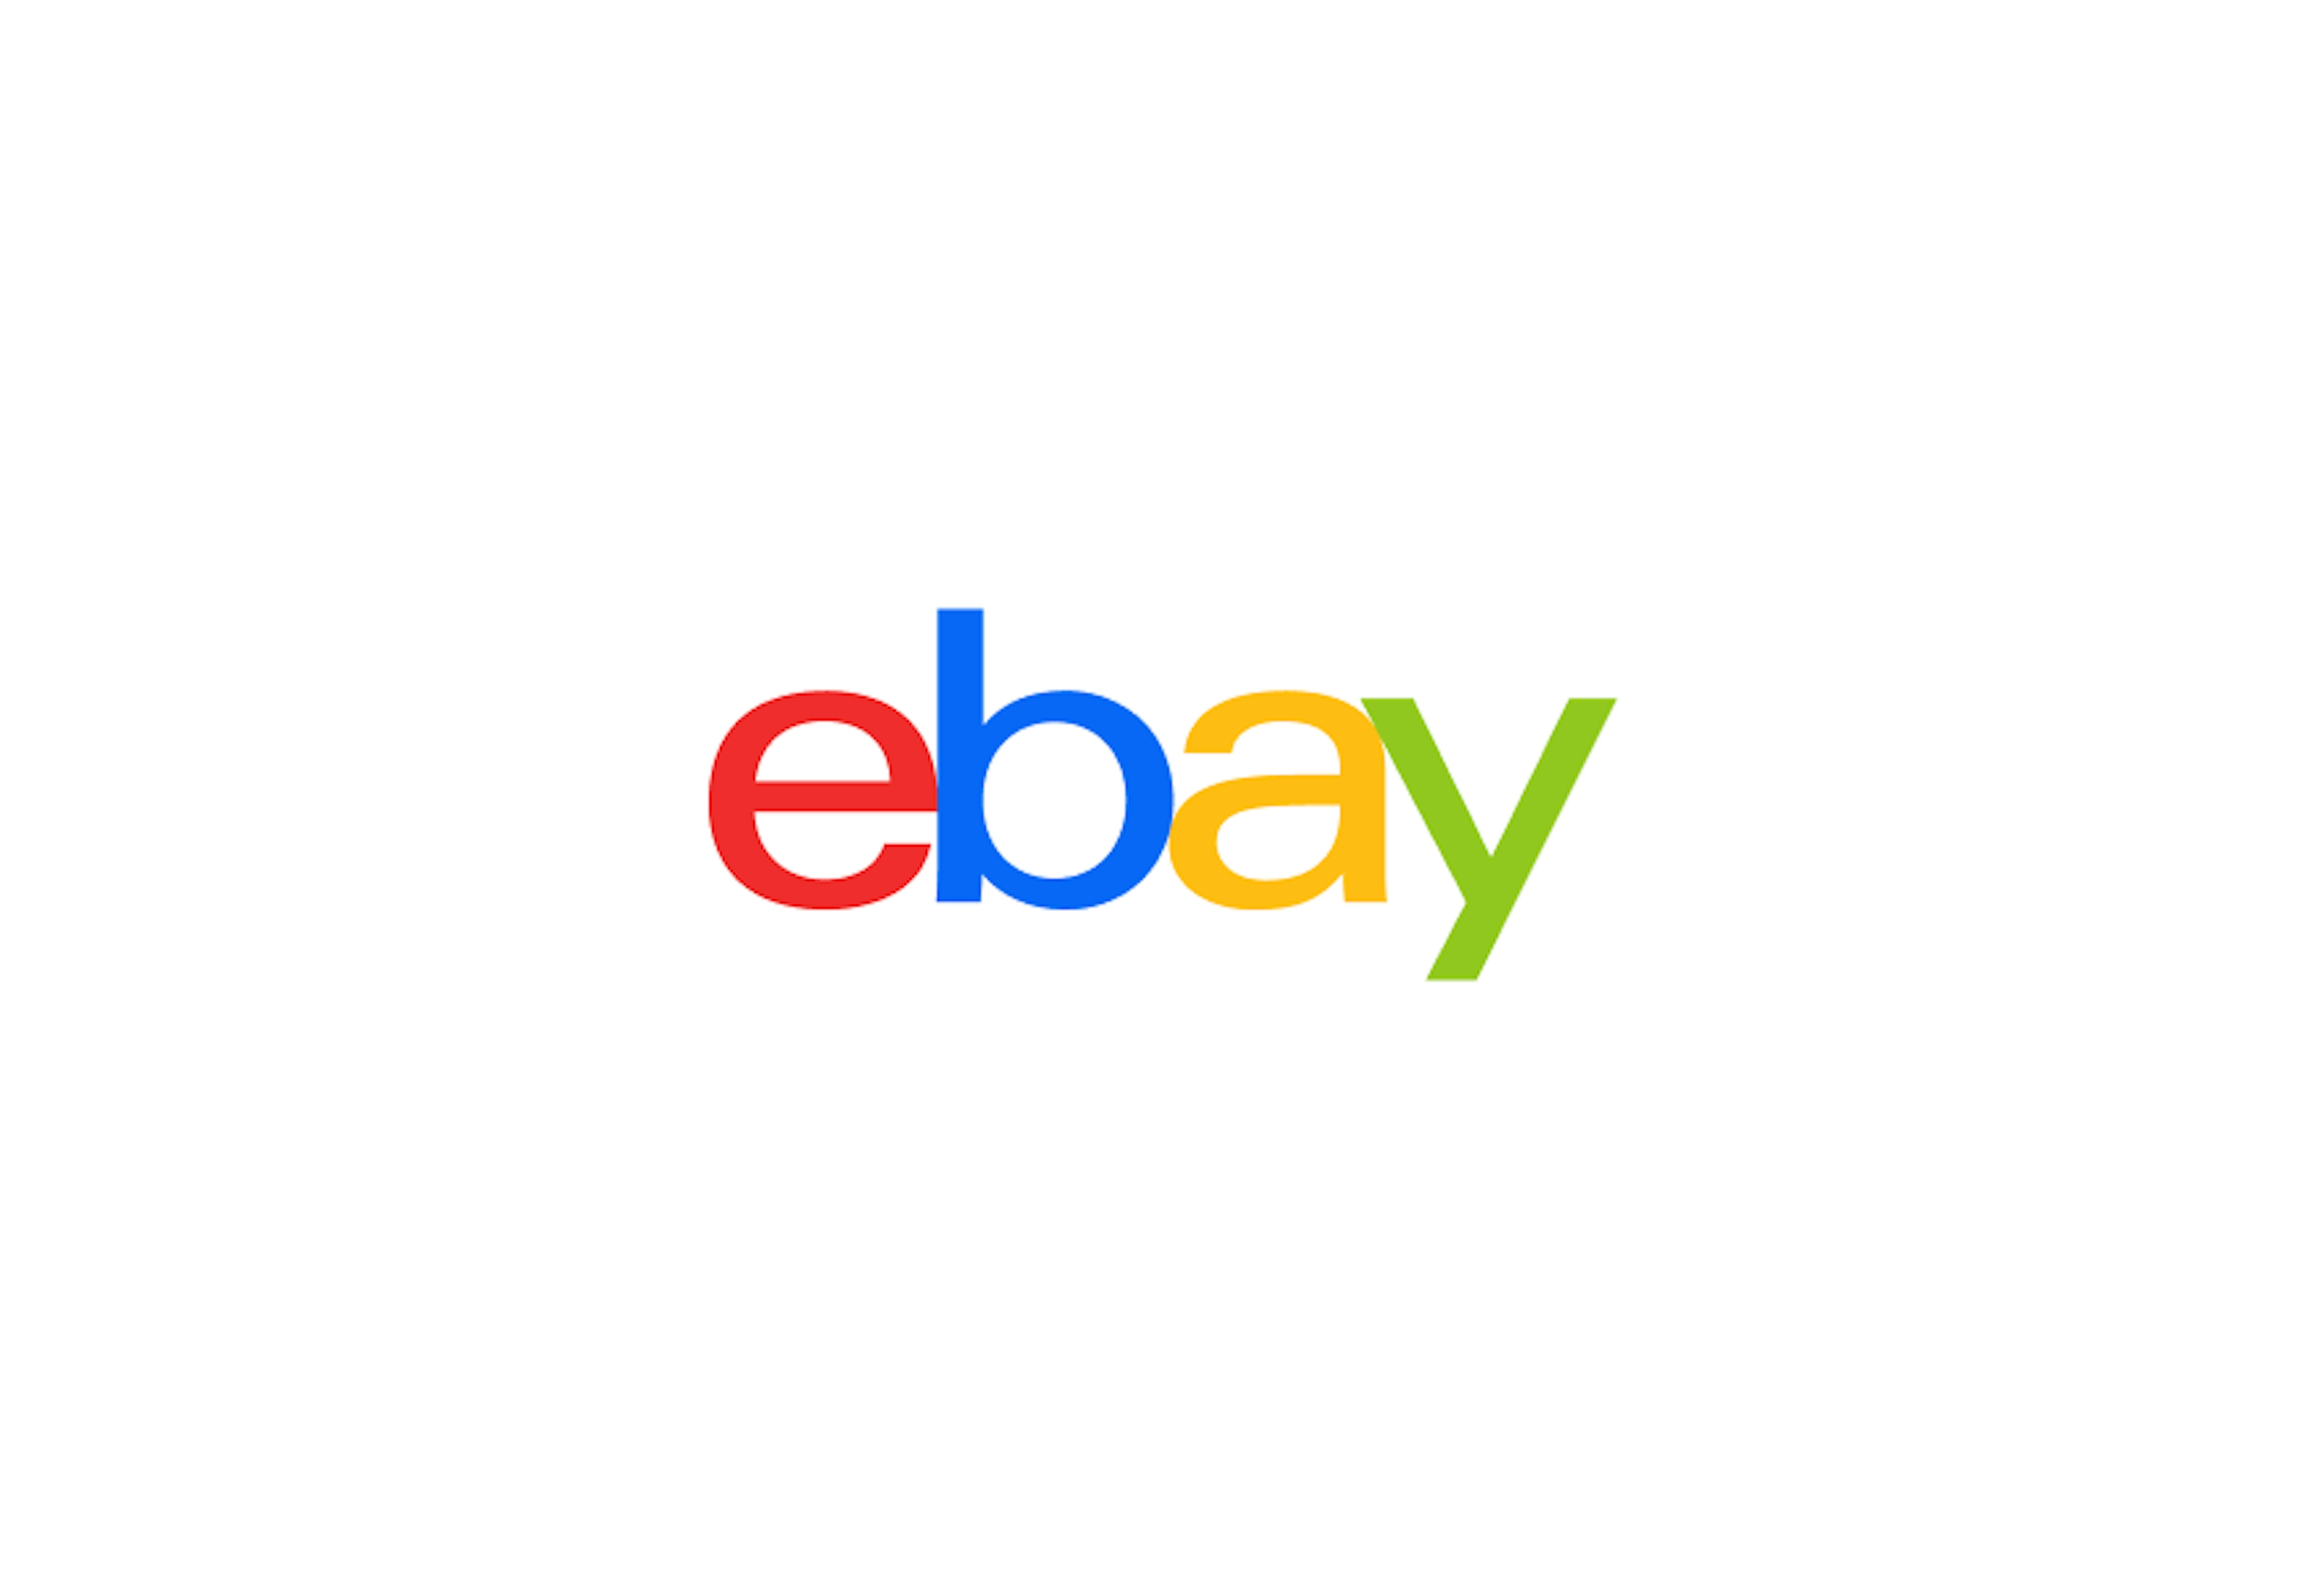 The colored eBay logo over a white background.